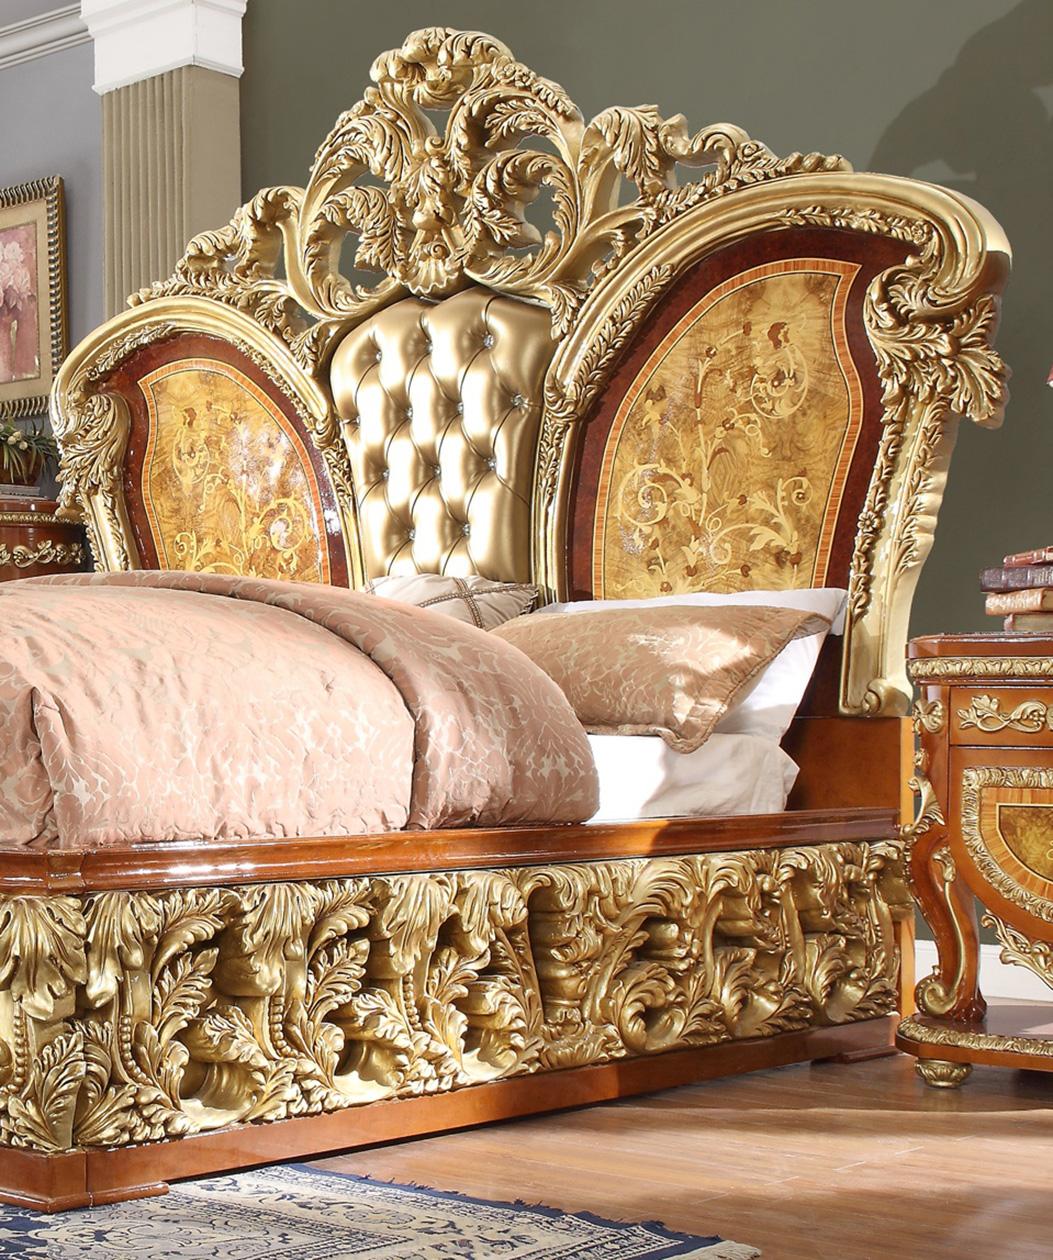 

    
Luxury King Bed Tufted Leather Gold Curved Wood Homey Design HD-8024
